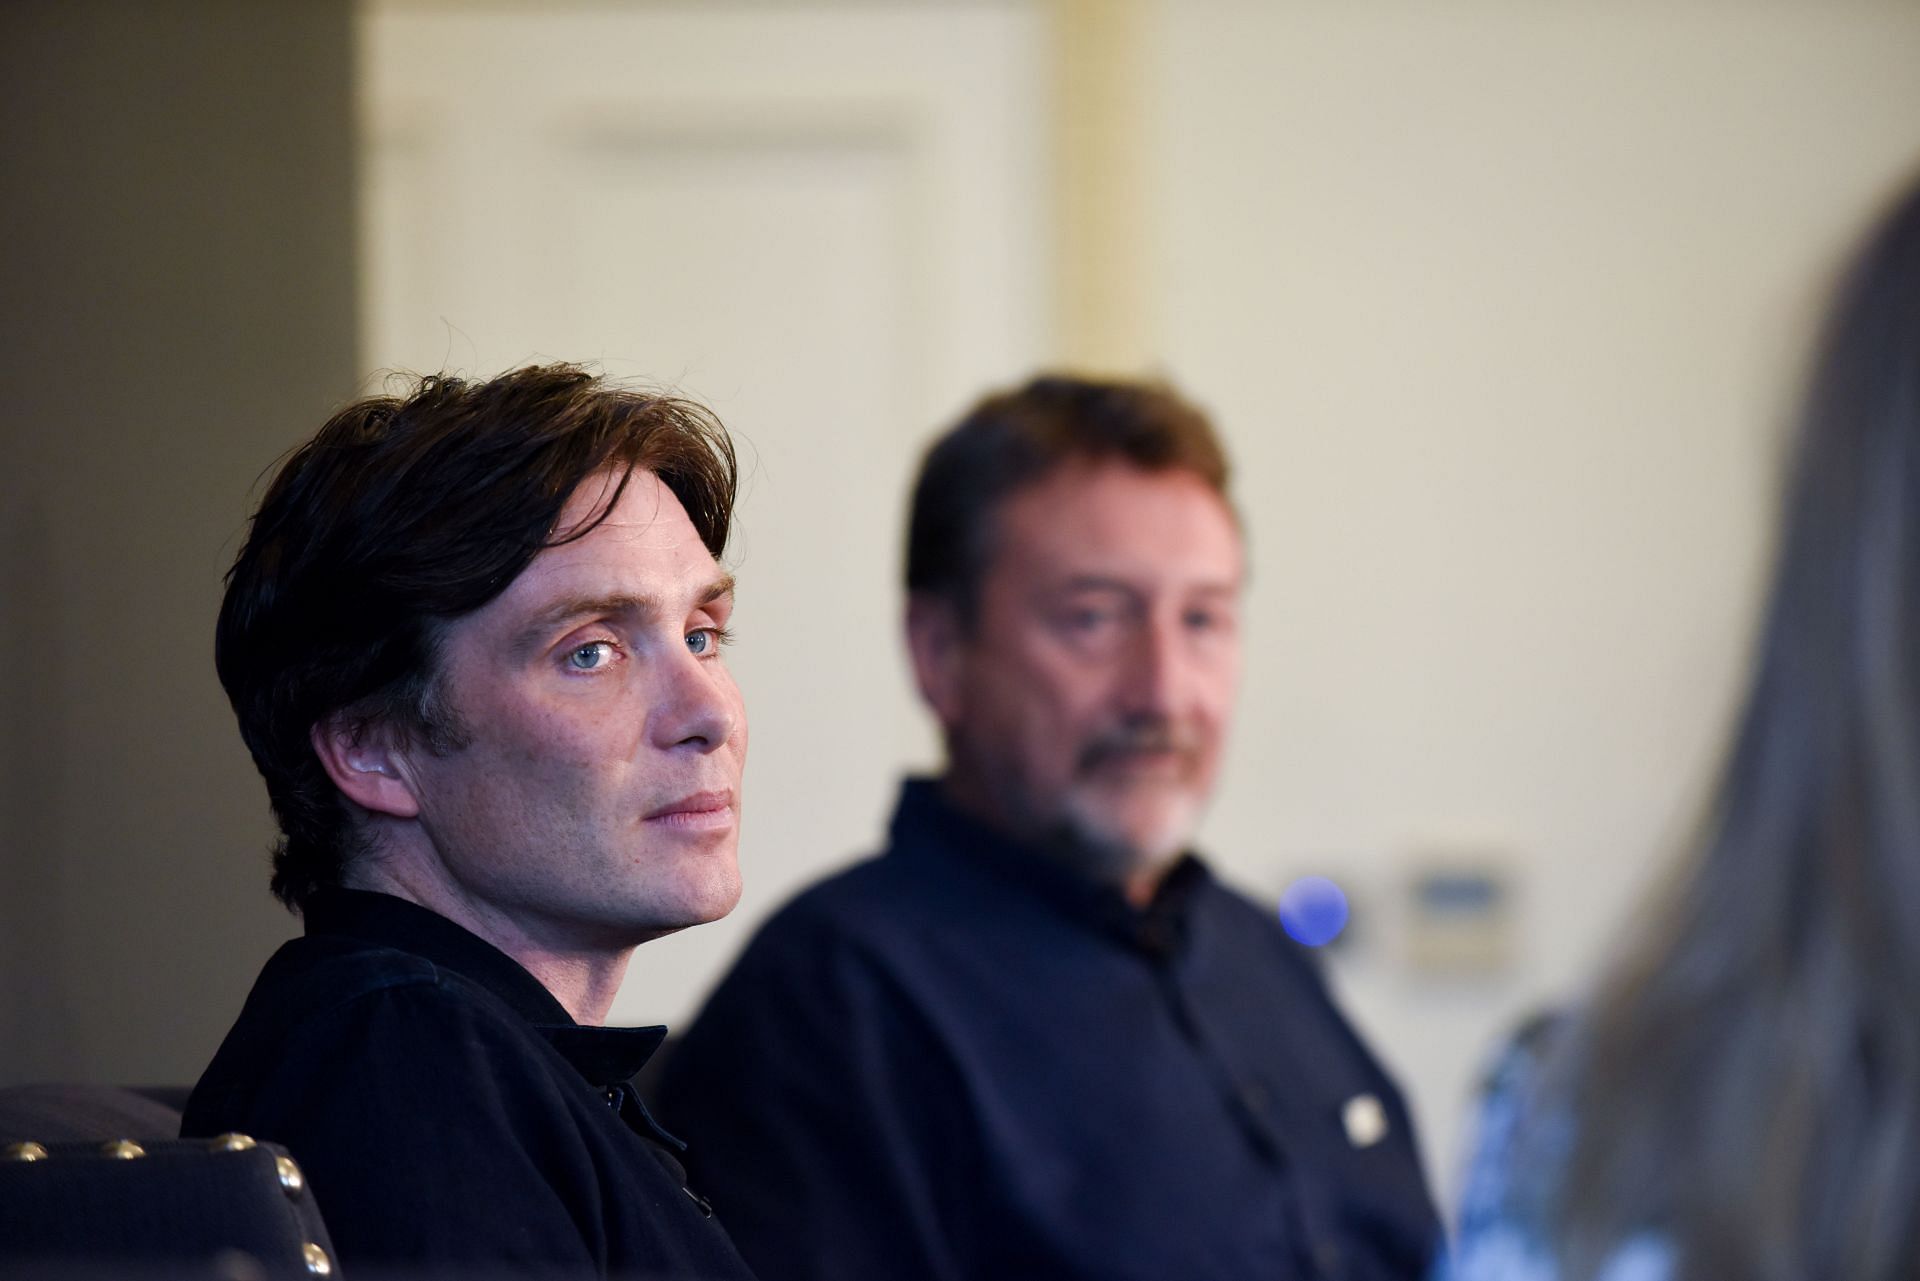 An Evening with Steven Knight and Cillian Murphy from Peaky Blinders at Esquire Townhouse with Dior